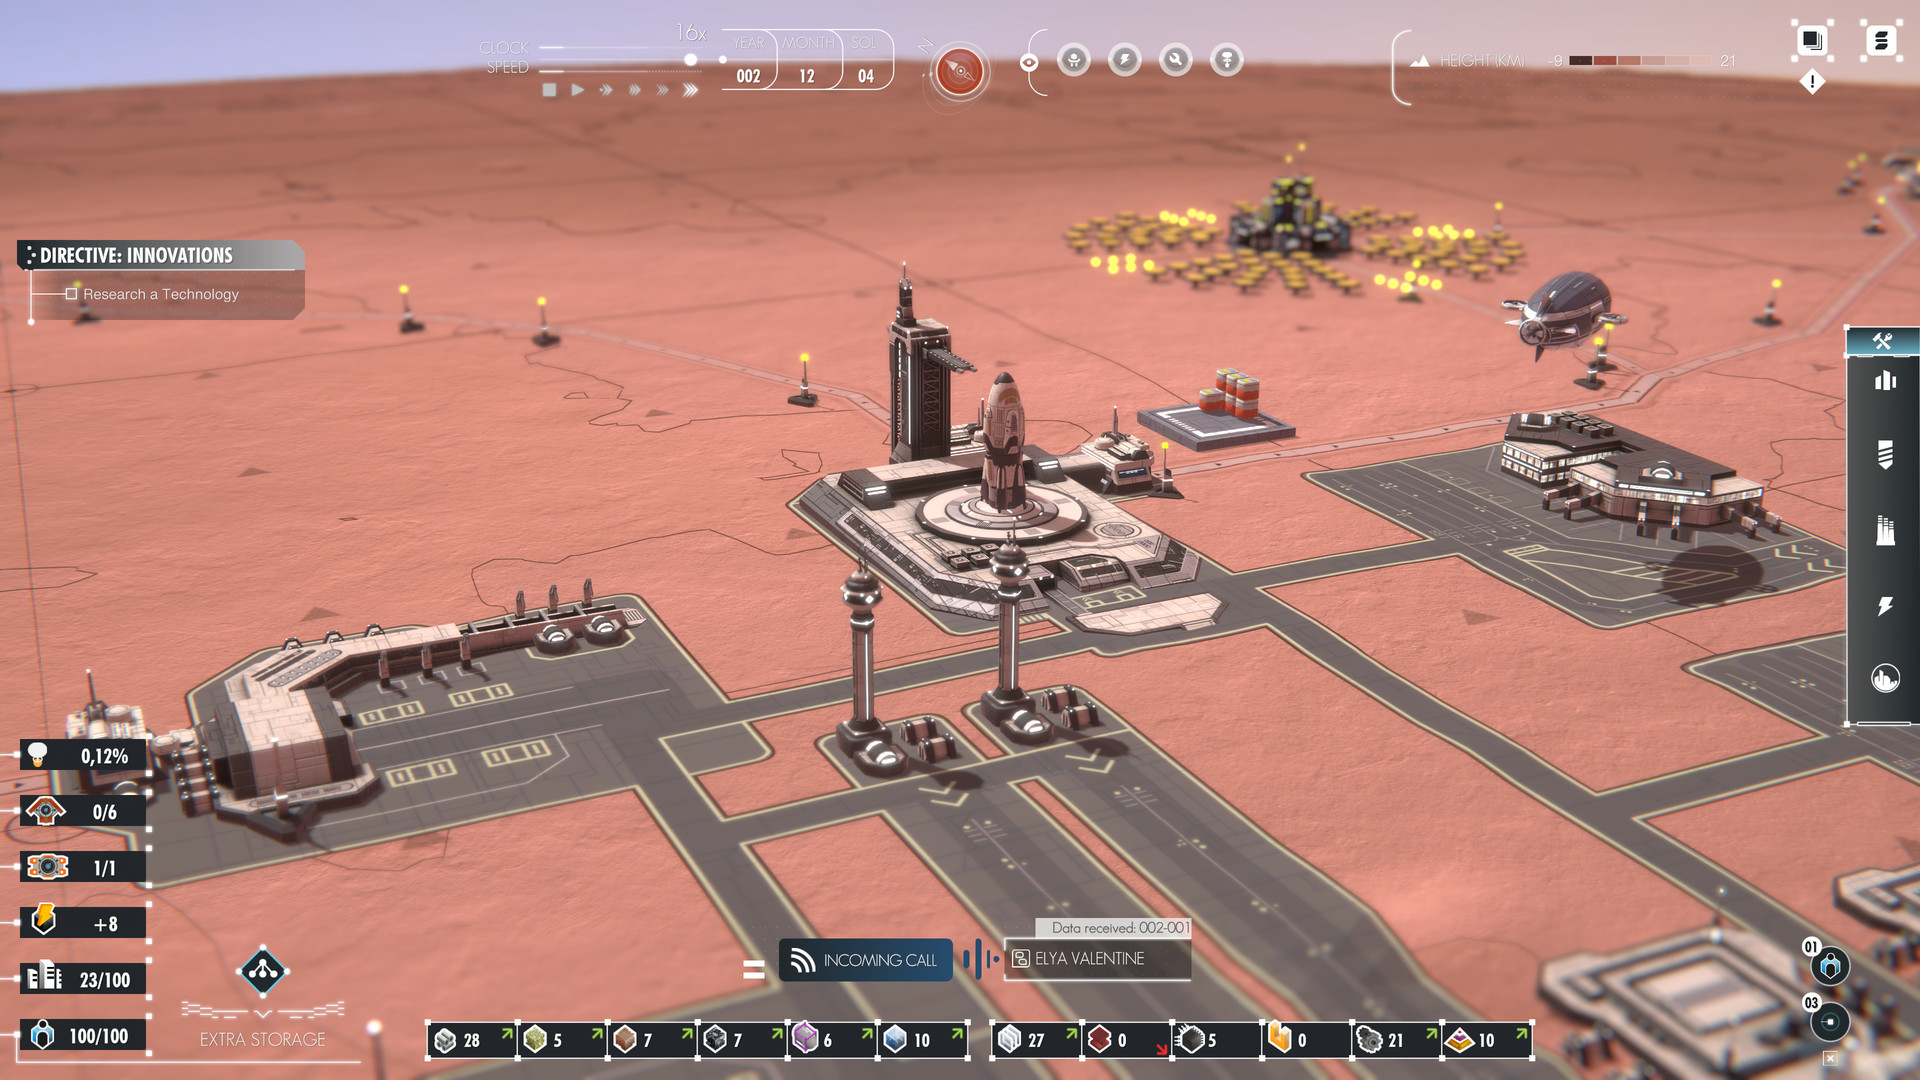 An image of mars colonization efforts from the videogame Per Aspera.